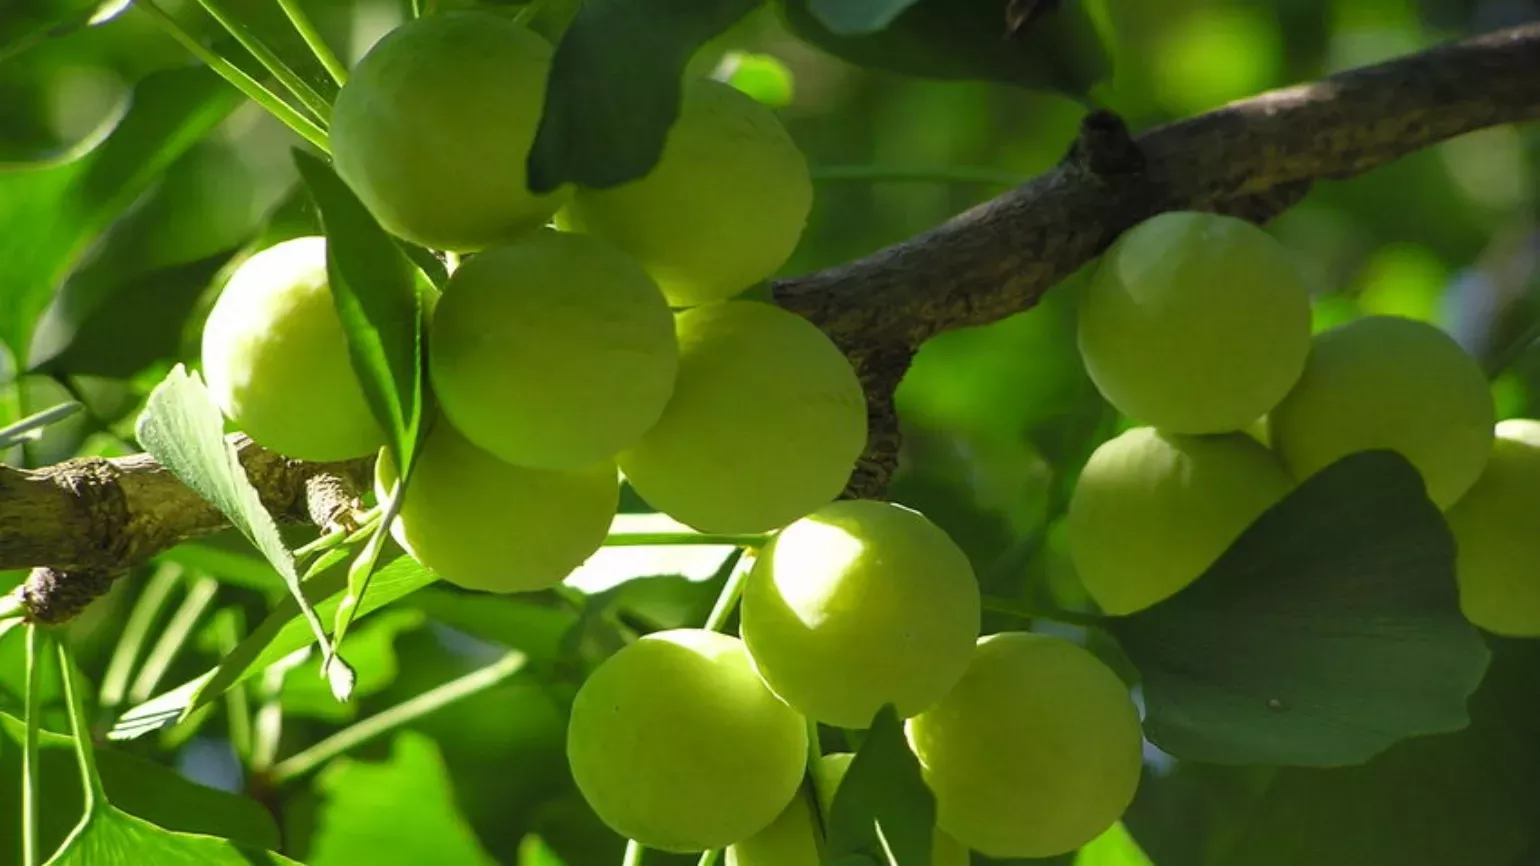 Rounded, green fruits of maidenhair tree